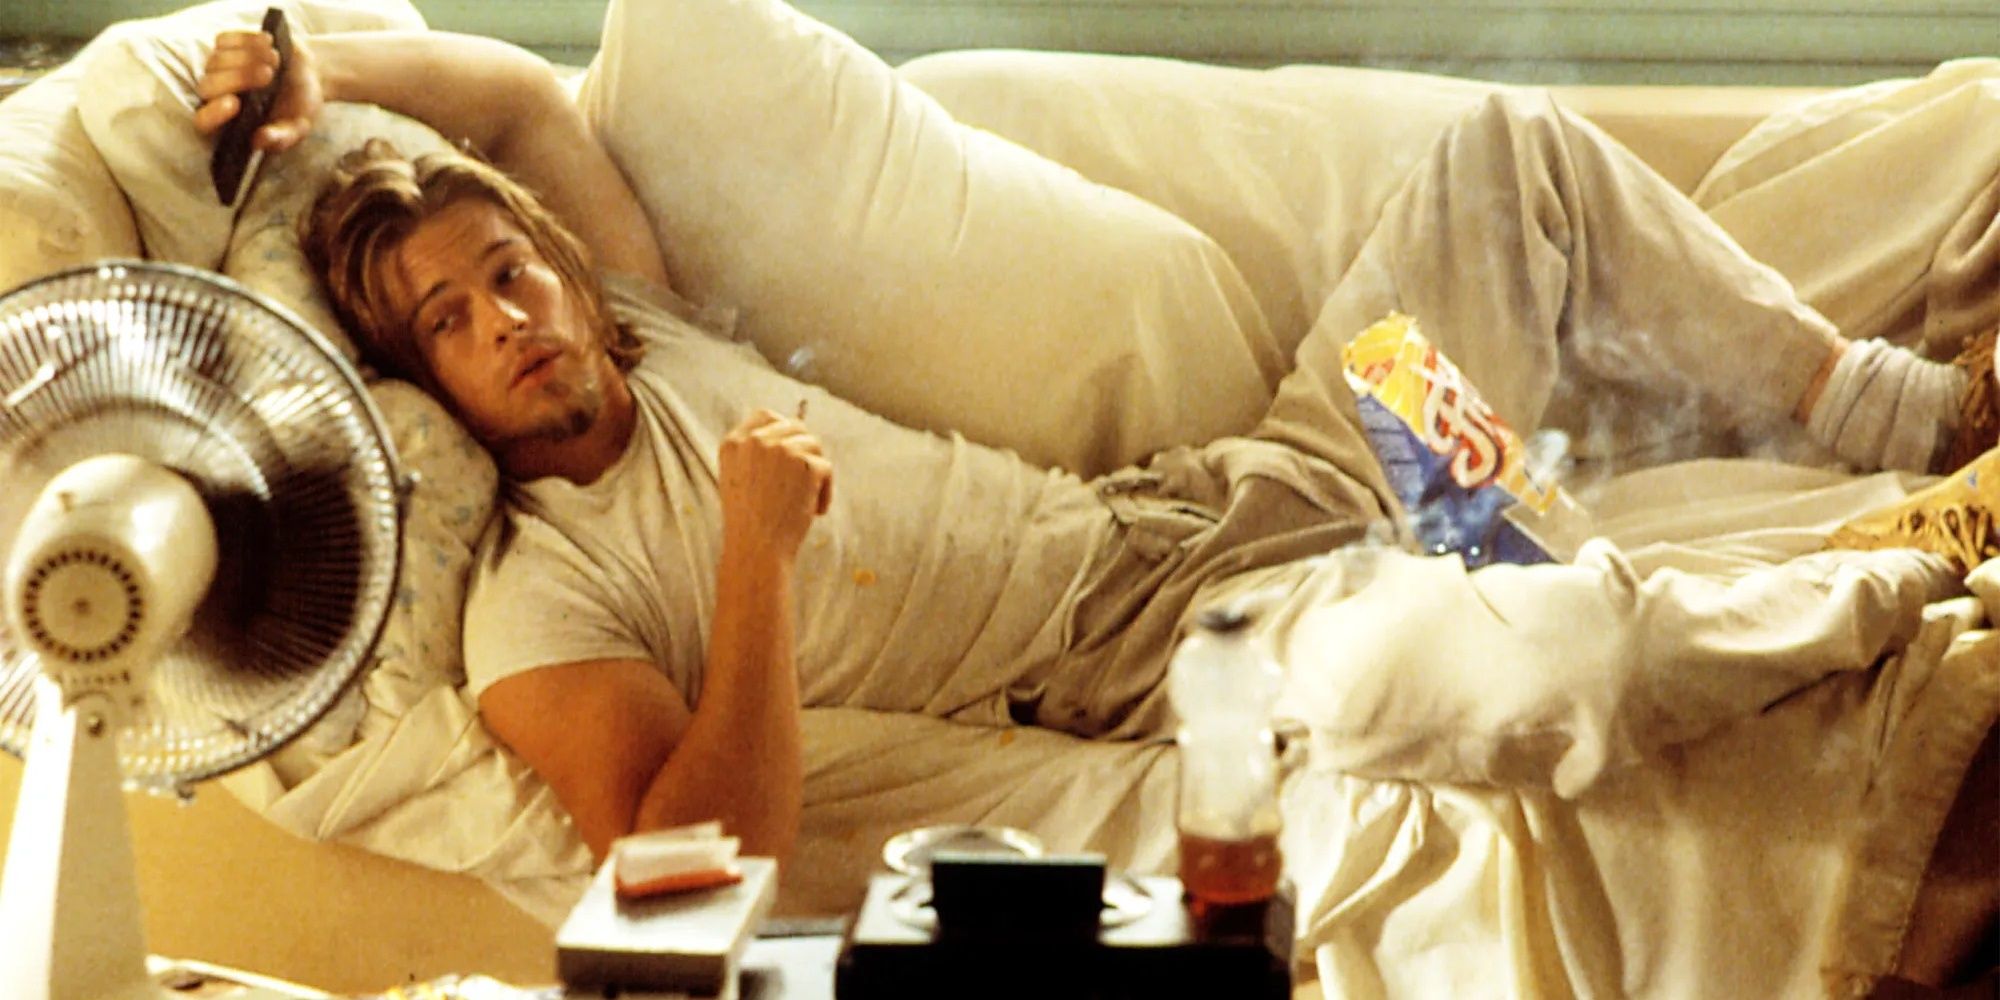 Floyd laying on the couch in sweatpants with a bag of Fritos in True Romance.